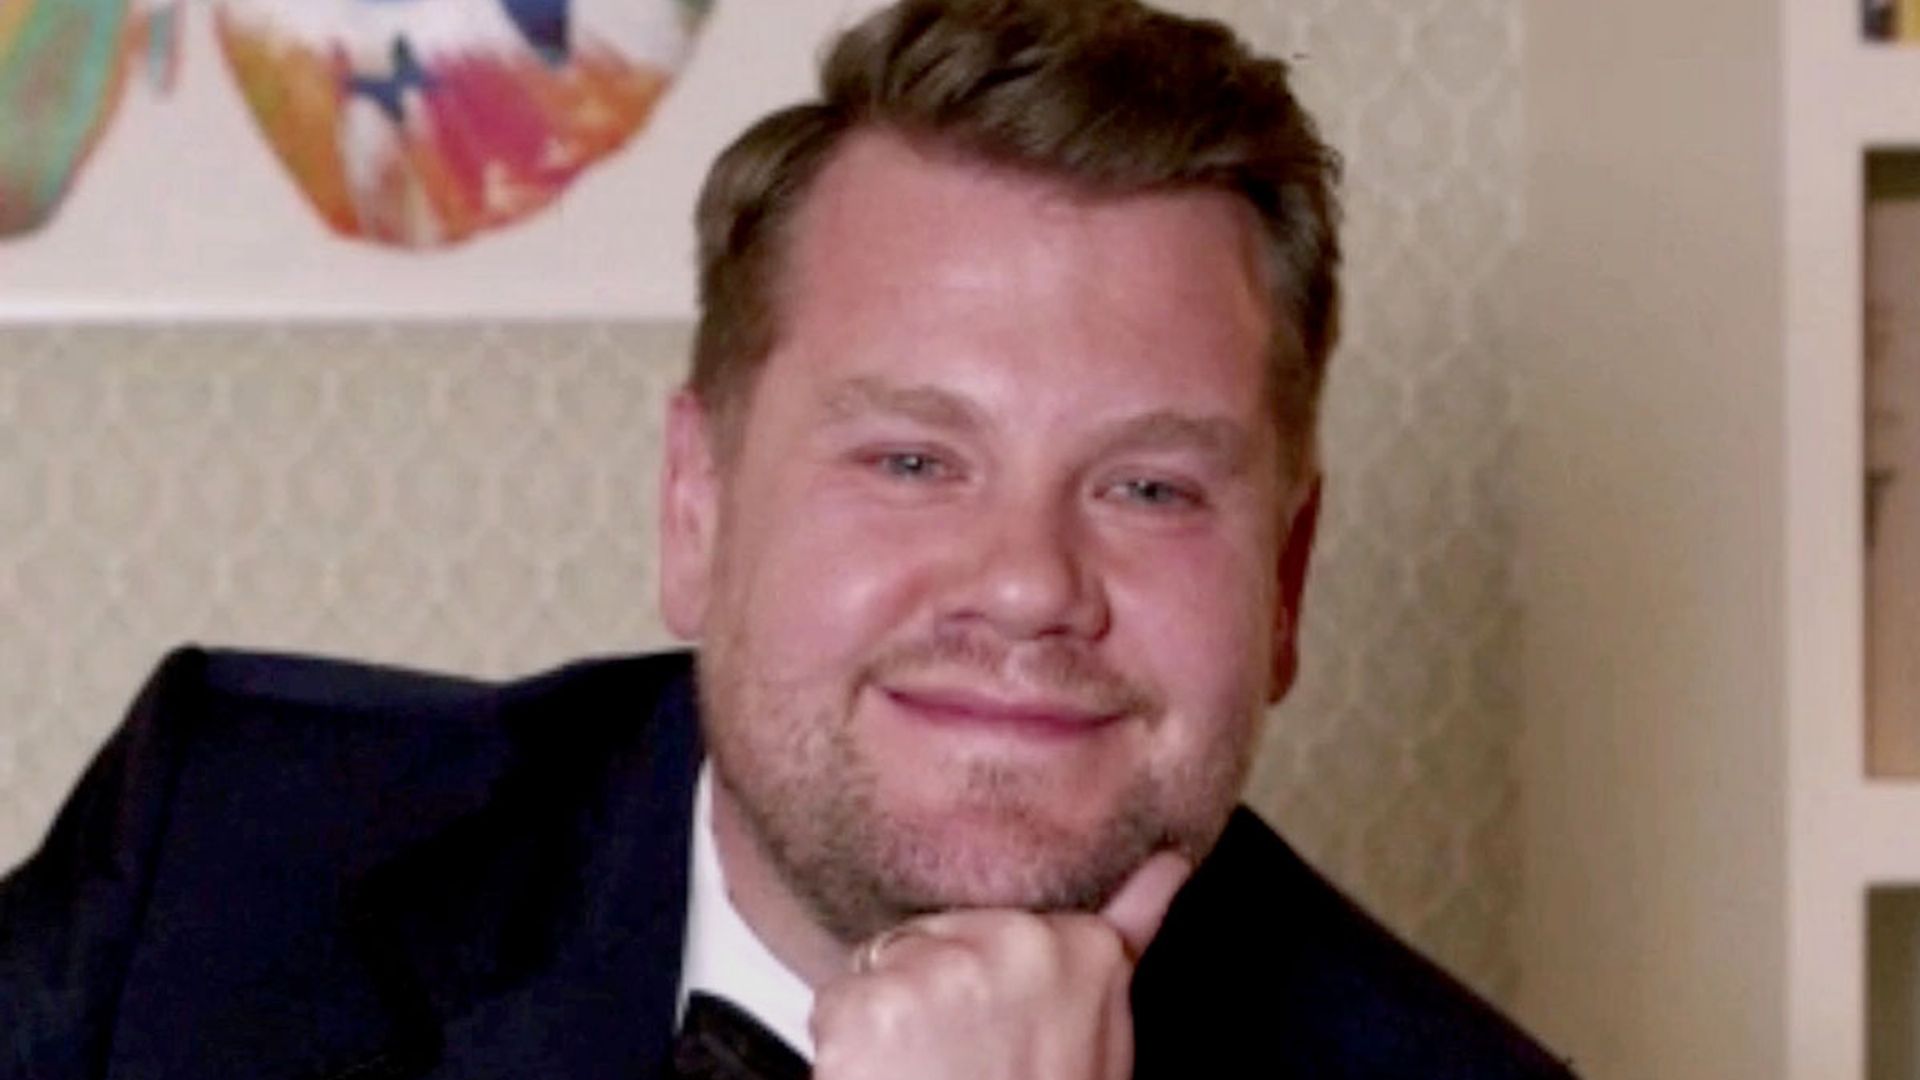 James Corden enjoys family outing with rarely seen lookalike son Max